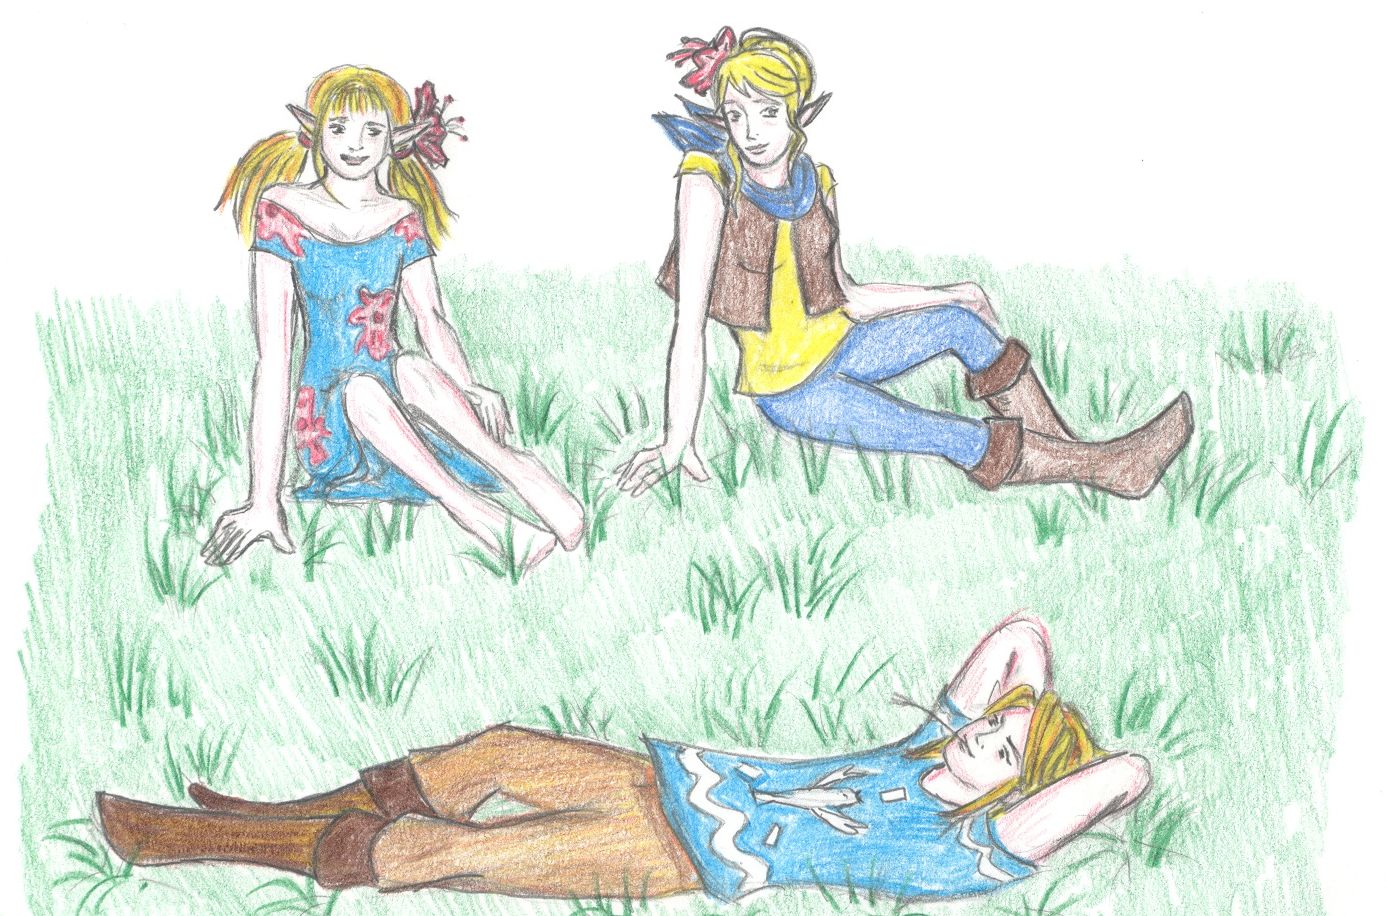 Link,Tetra and Arill by DannyH